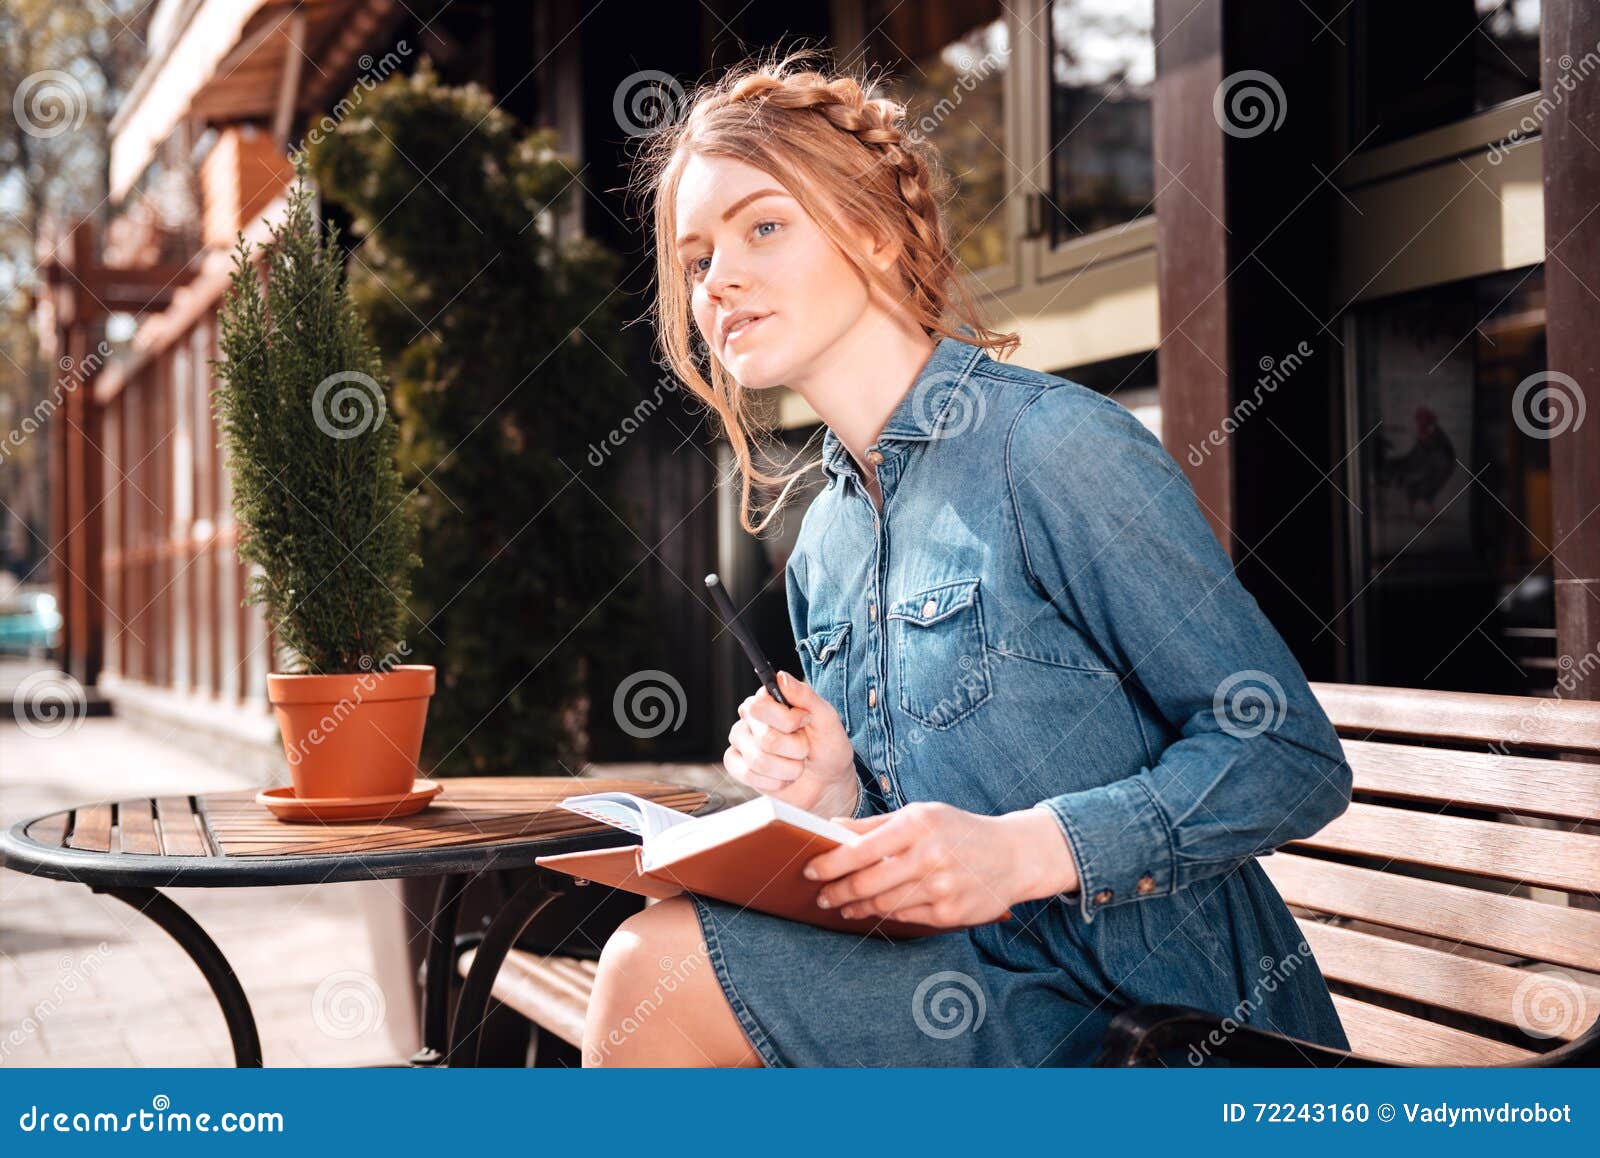 Pretty Woman Sitting and Writing in Notebook Outdoors Stock Photo ...